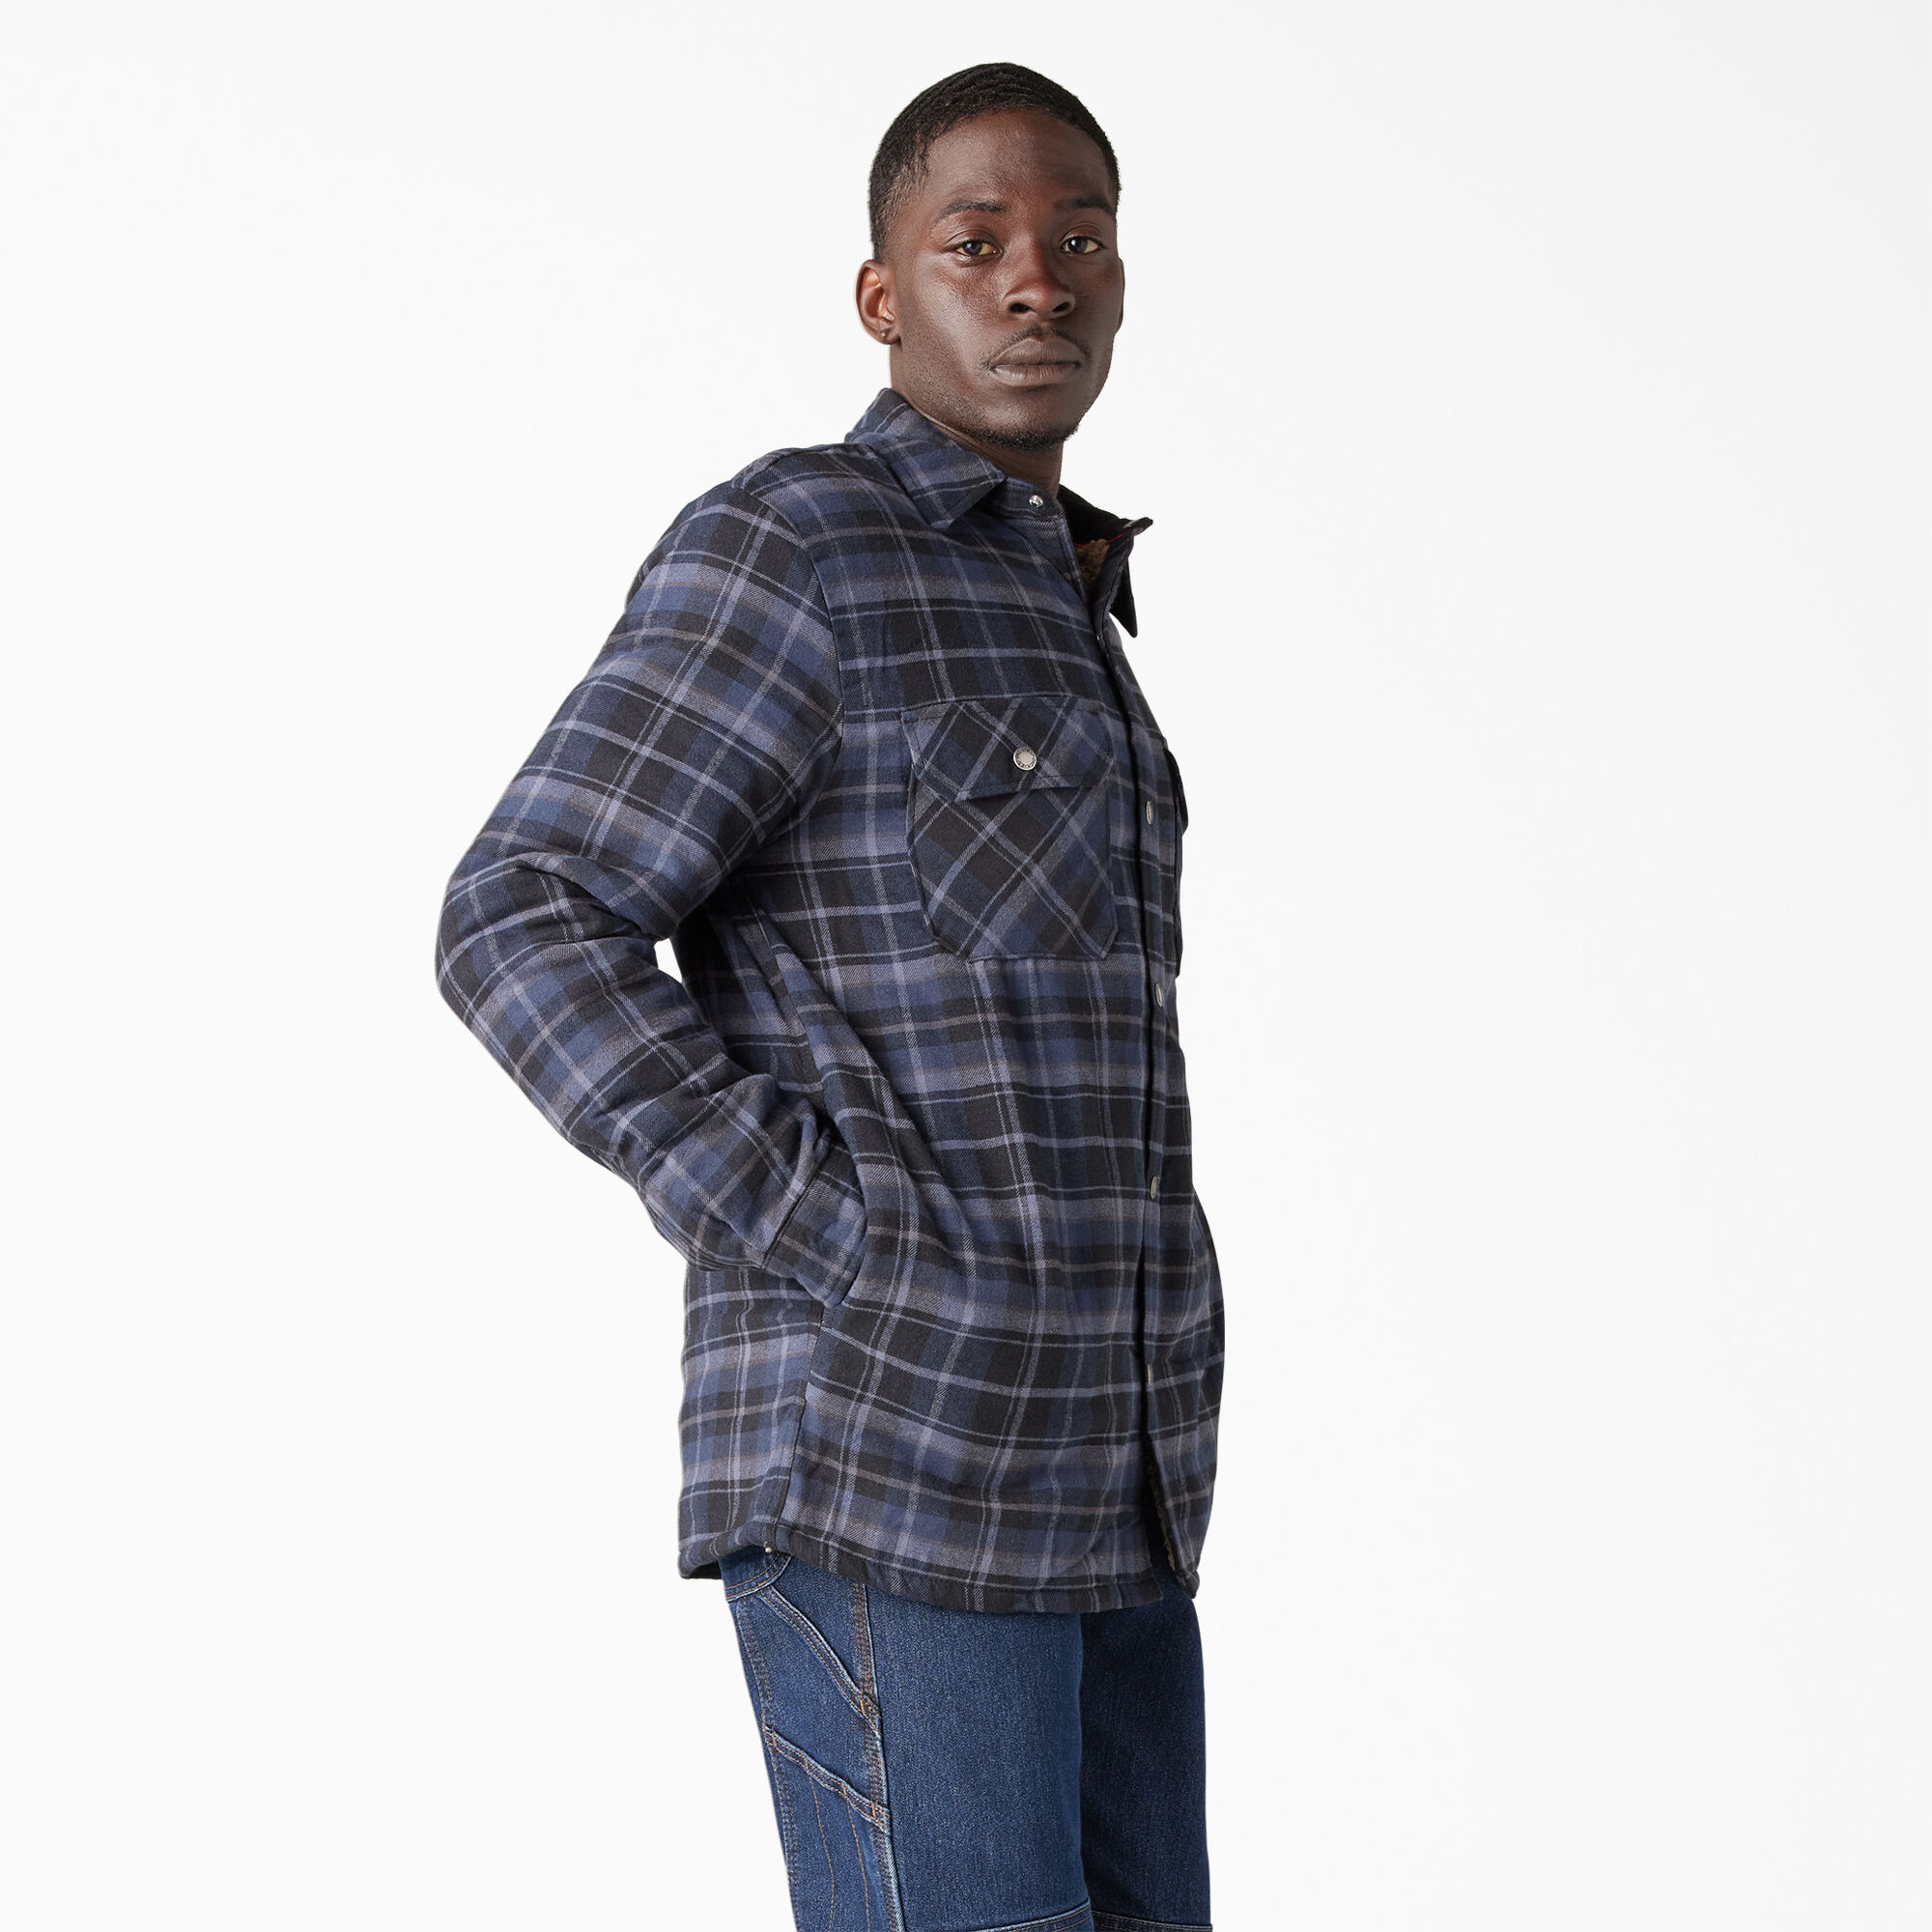 Quilted Flannel Shirt